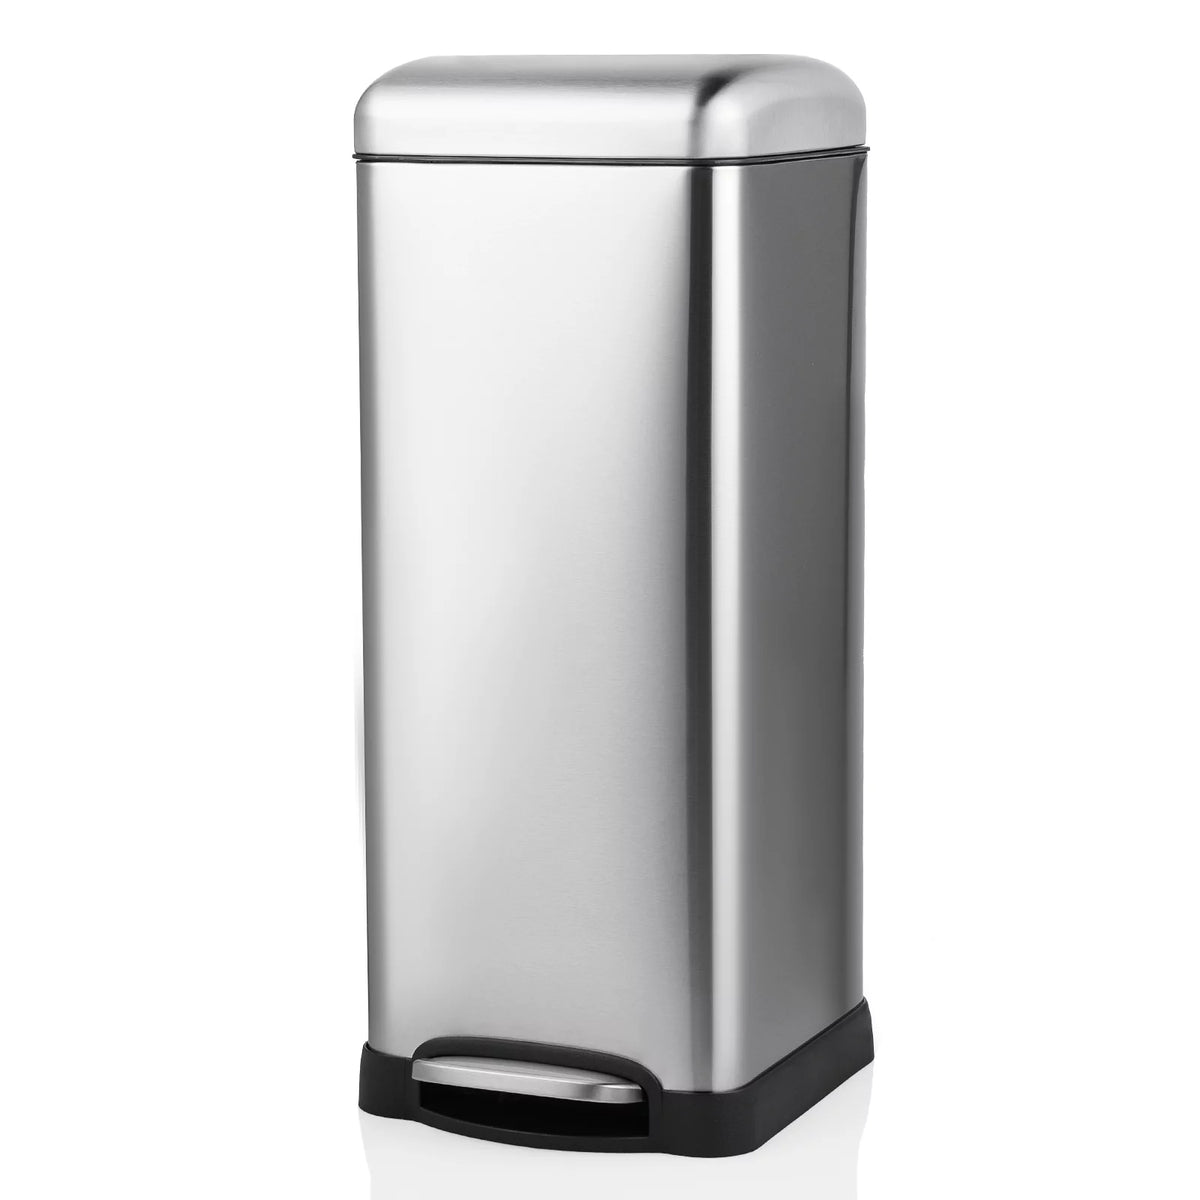 MoNiBloom 8 Gallon Trash Can, Hands-Free Stainless Steel Commercial Kitchen Step On Trash Can with Lid, Bathroom Waste Bin with Inner Bucket, Silver